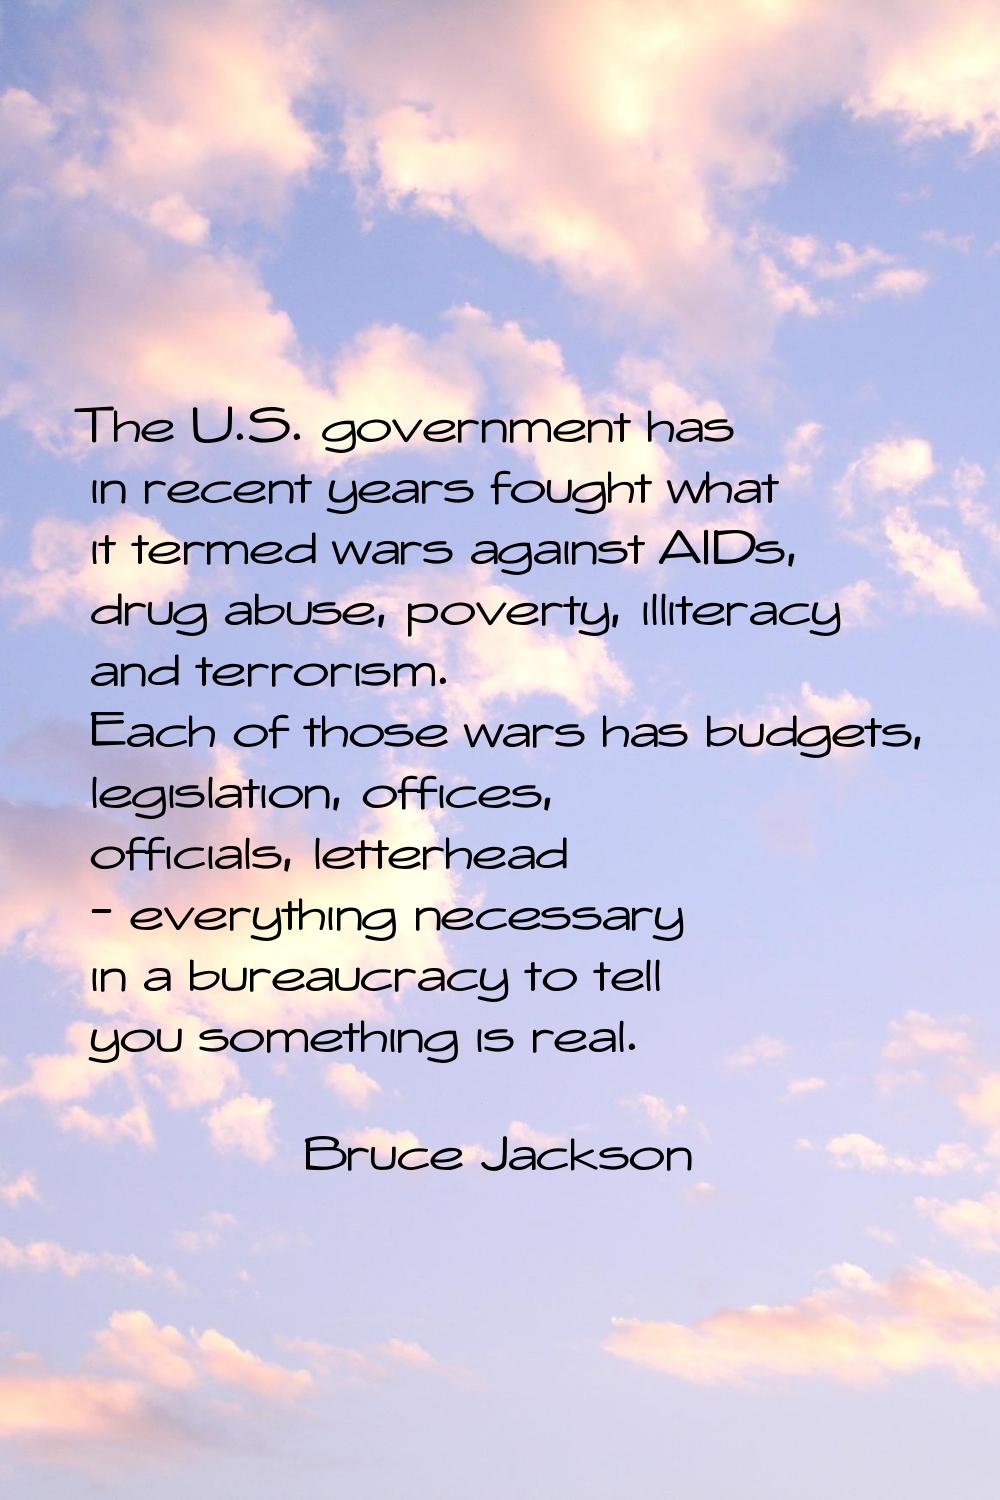 The U.S. government has in recent years fought what it termed wars against AIDs, drug abuse, povert